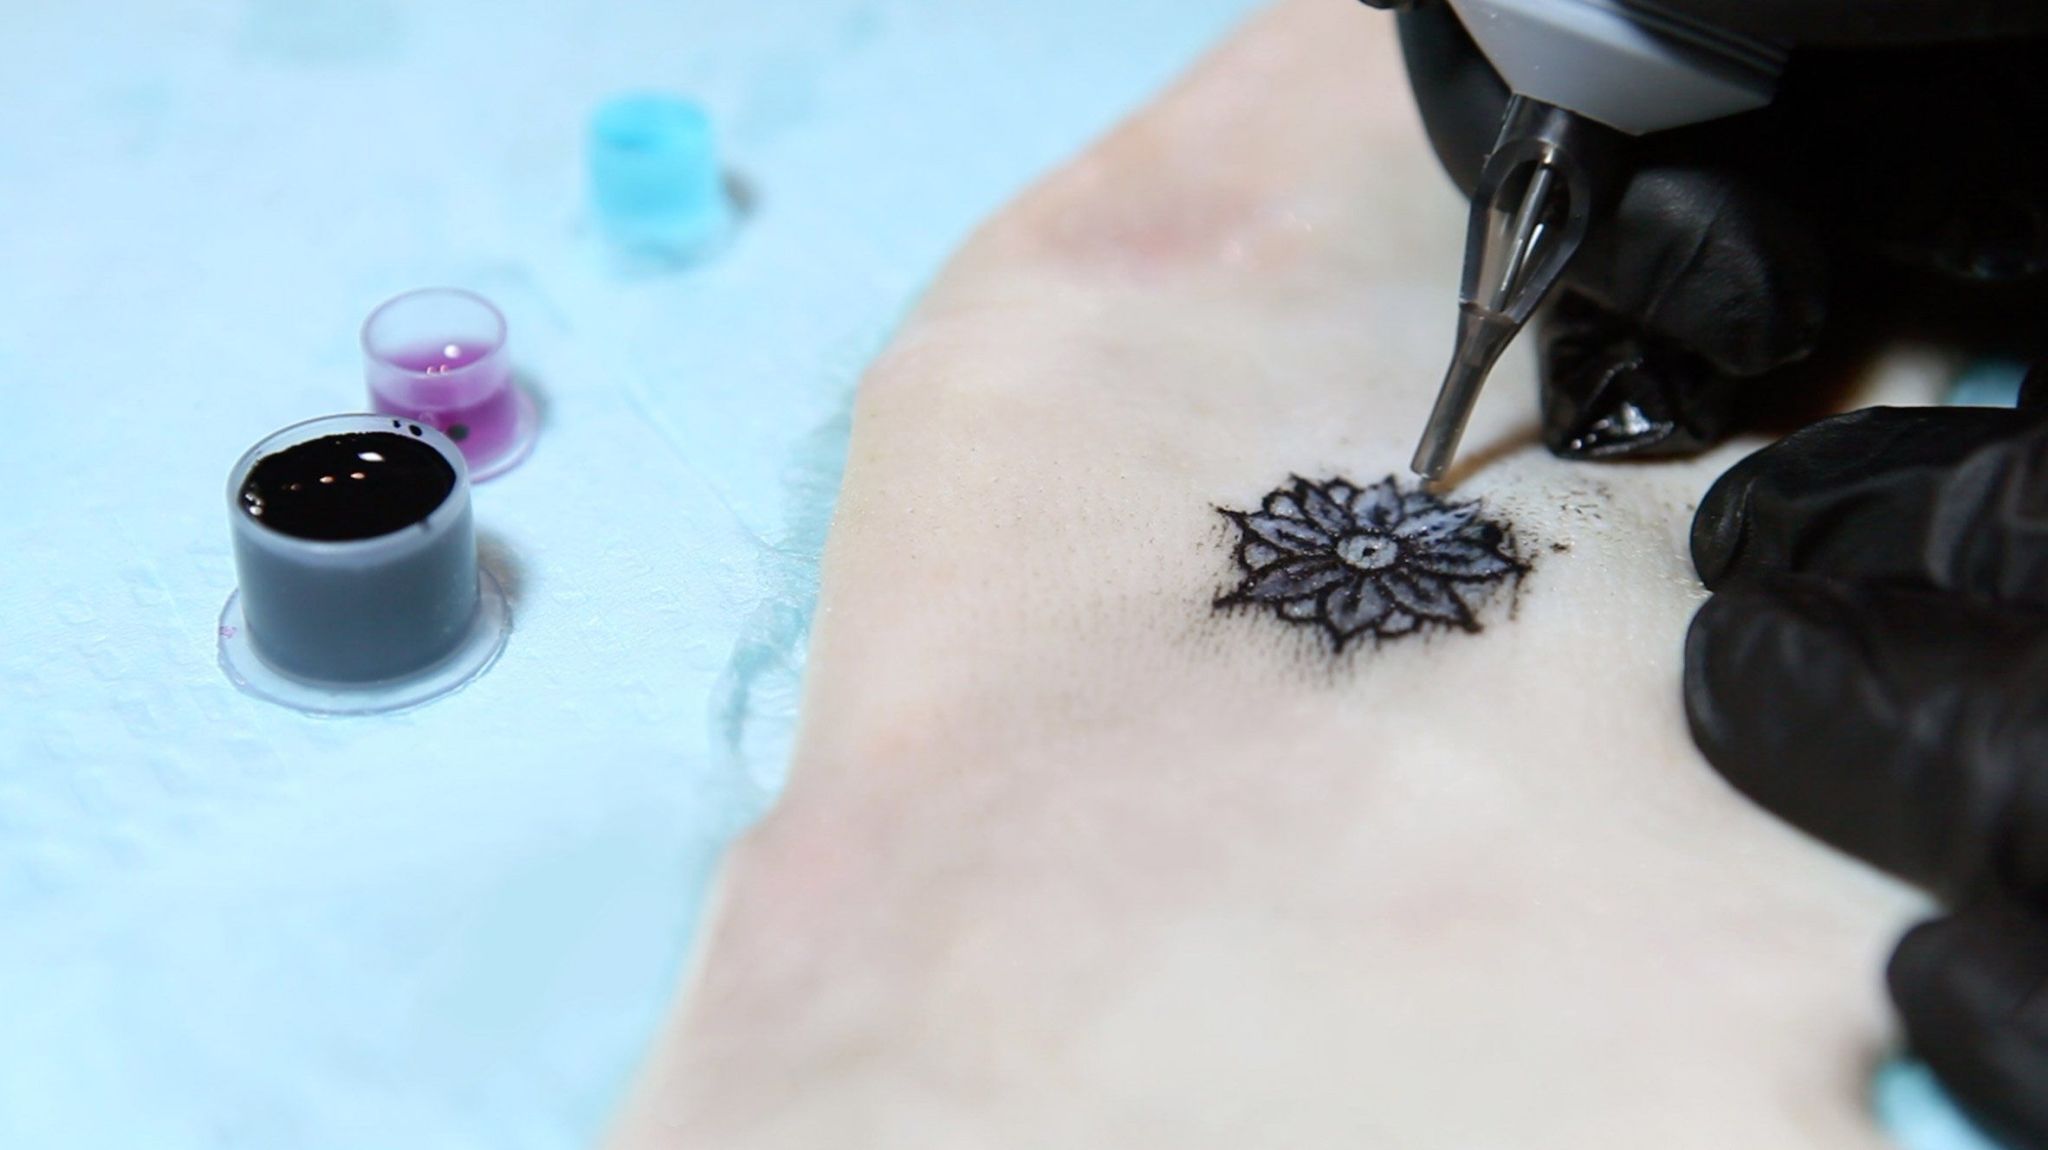 This Tattoo Ink Can Sense How Healthy You Are